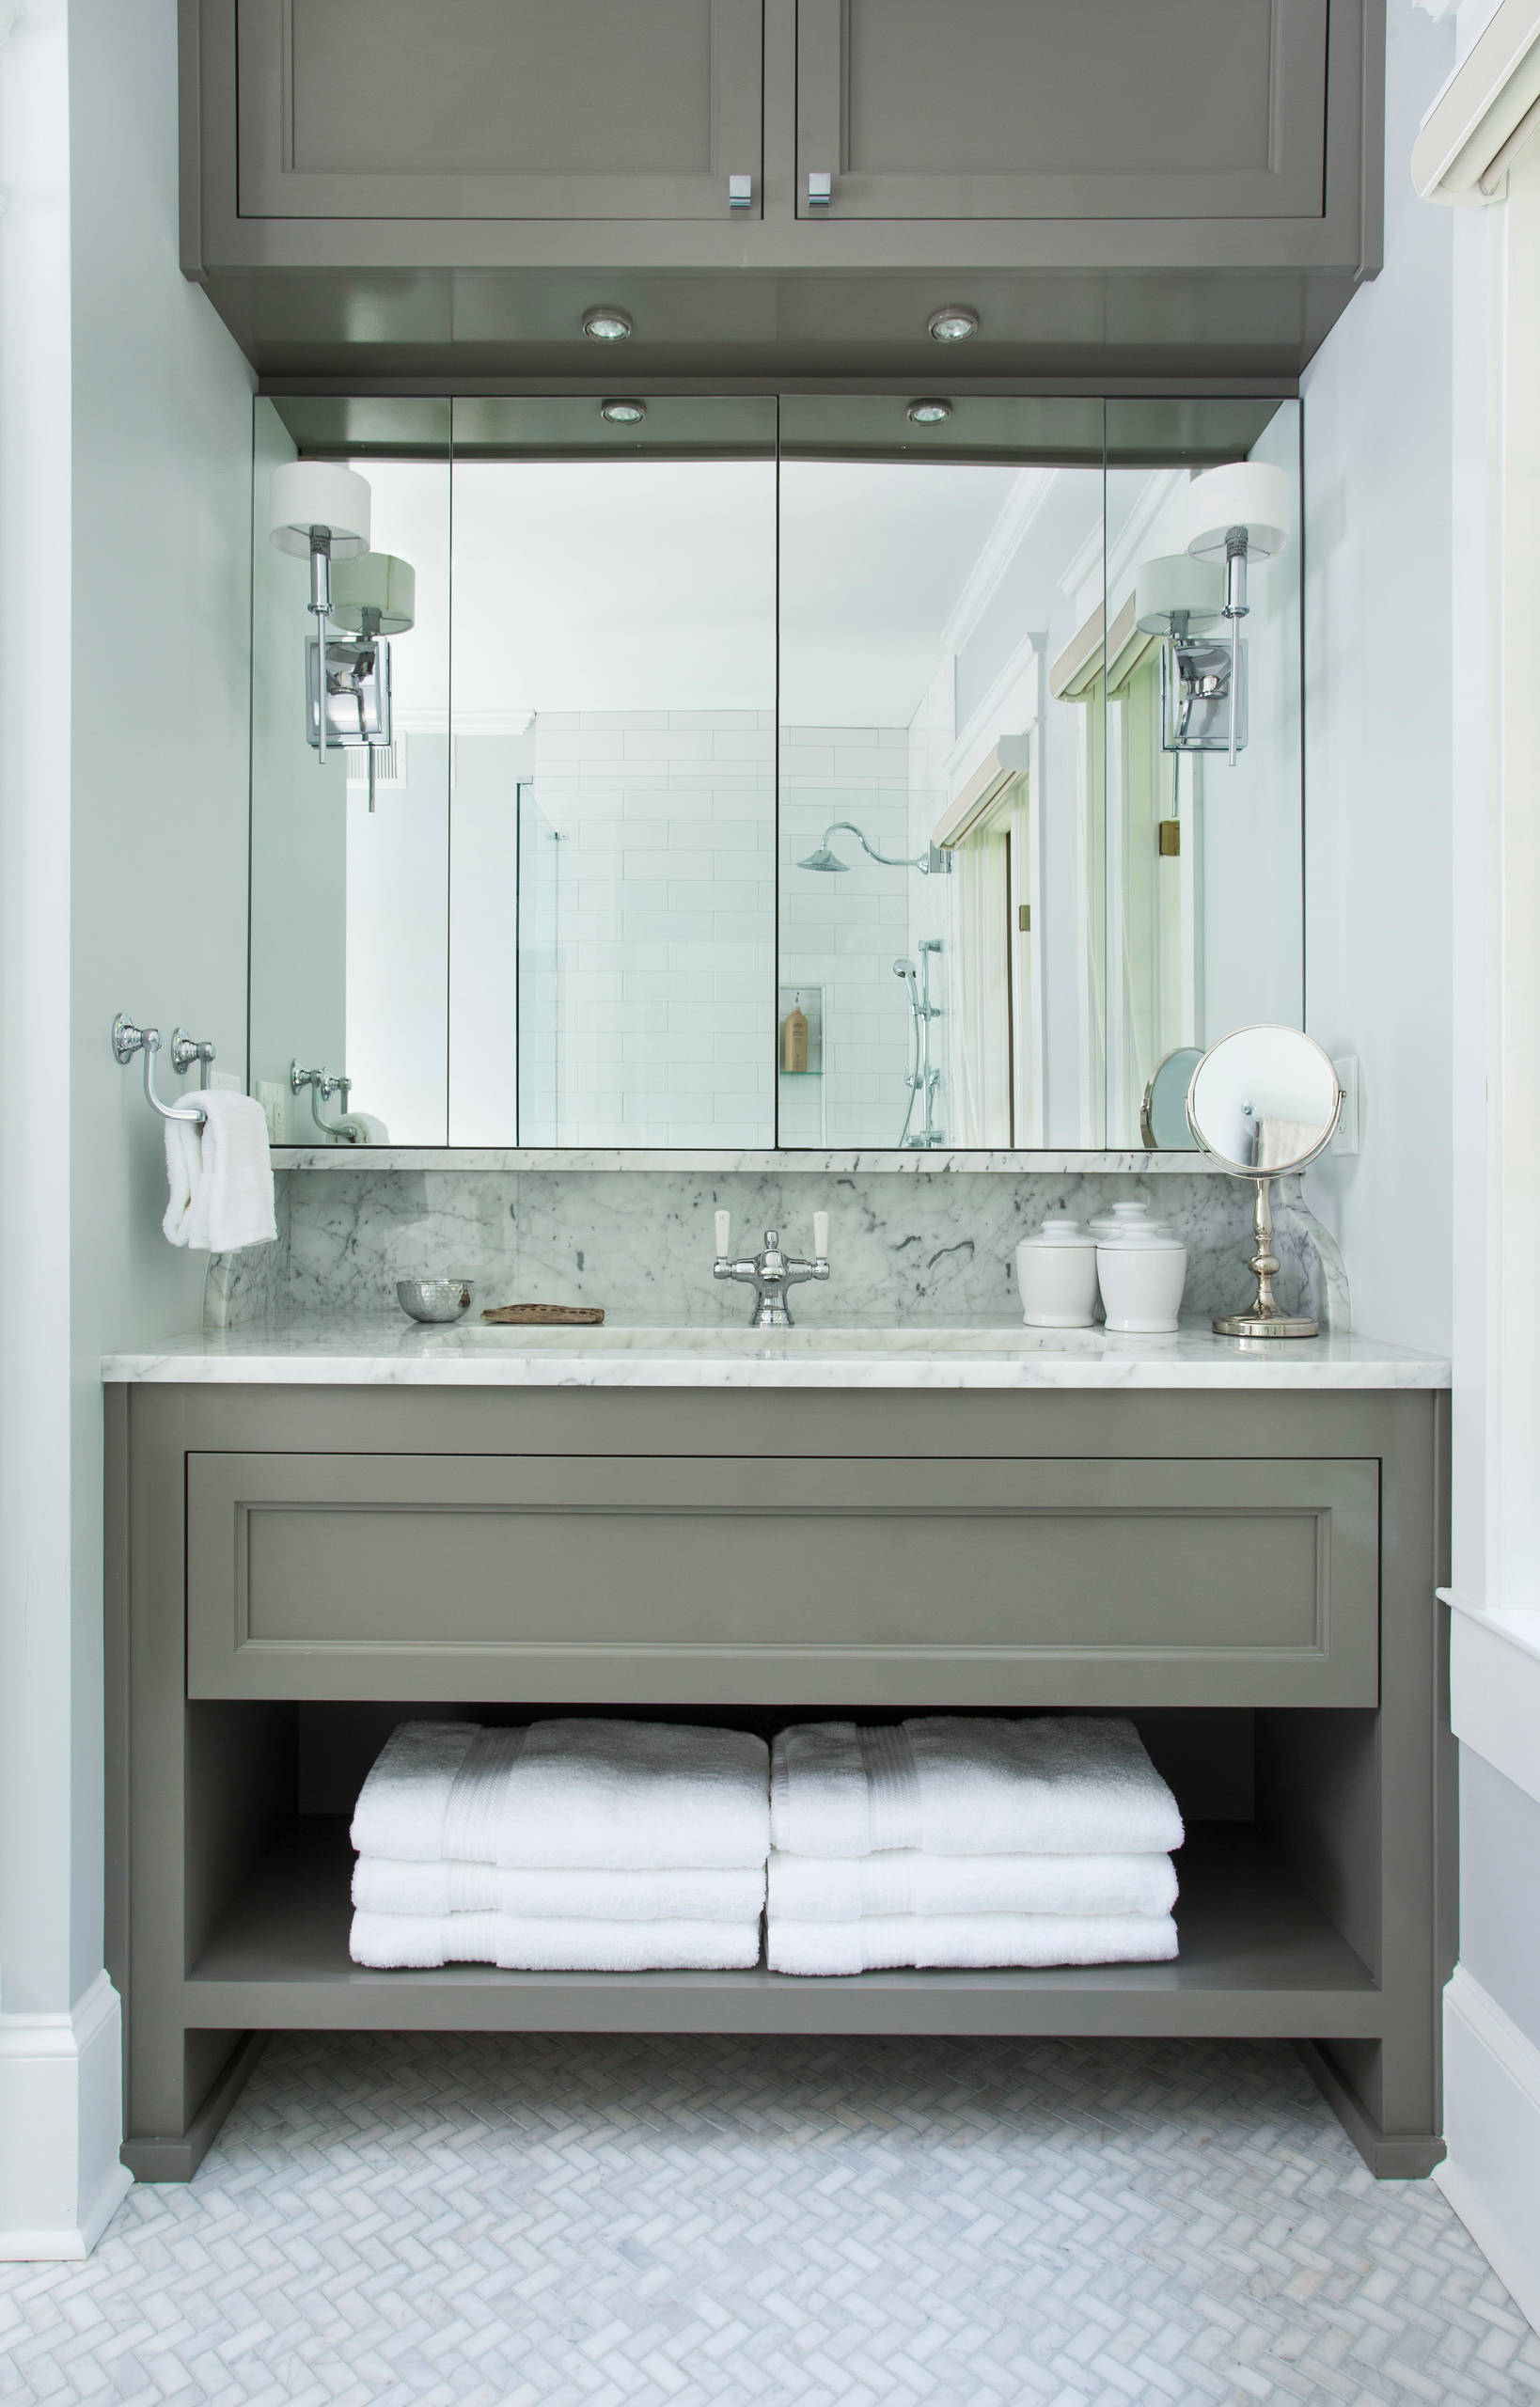 Vanity Height More A Guide To The, What Is The Standard Height Of A Bathroom Vanity Cabinet